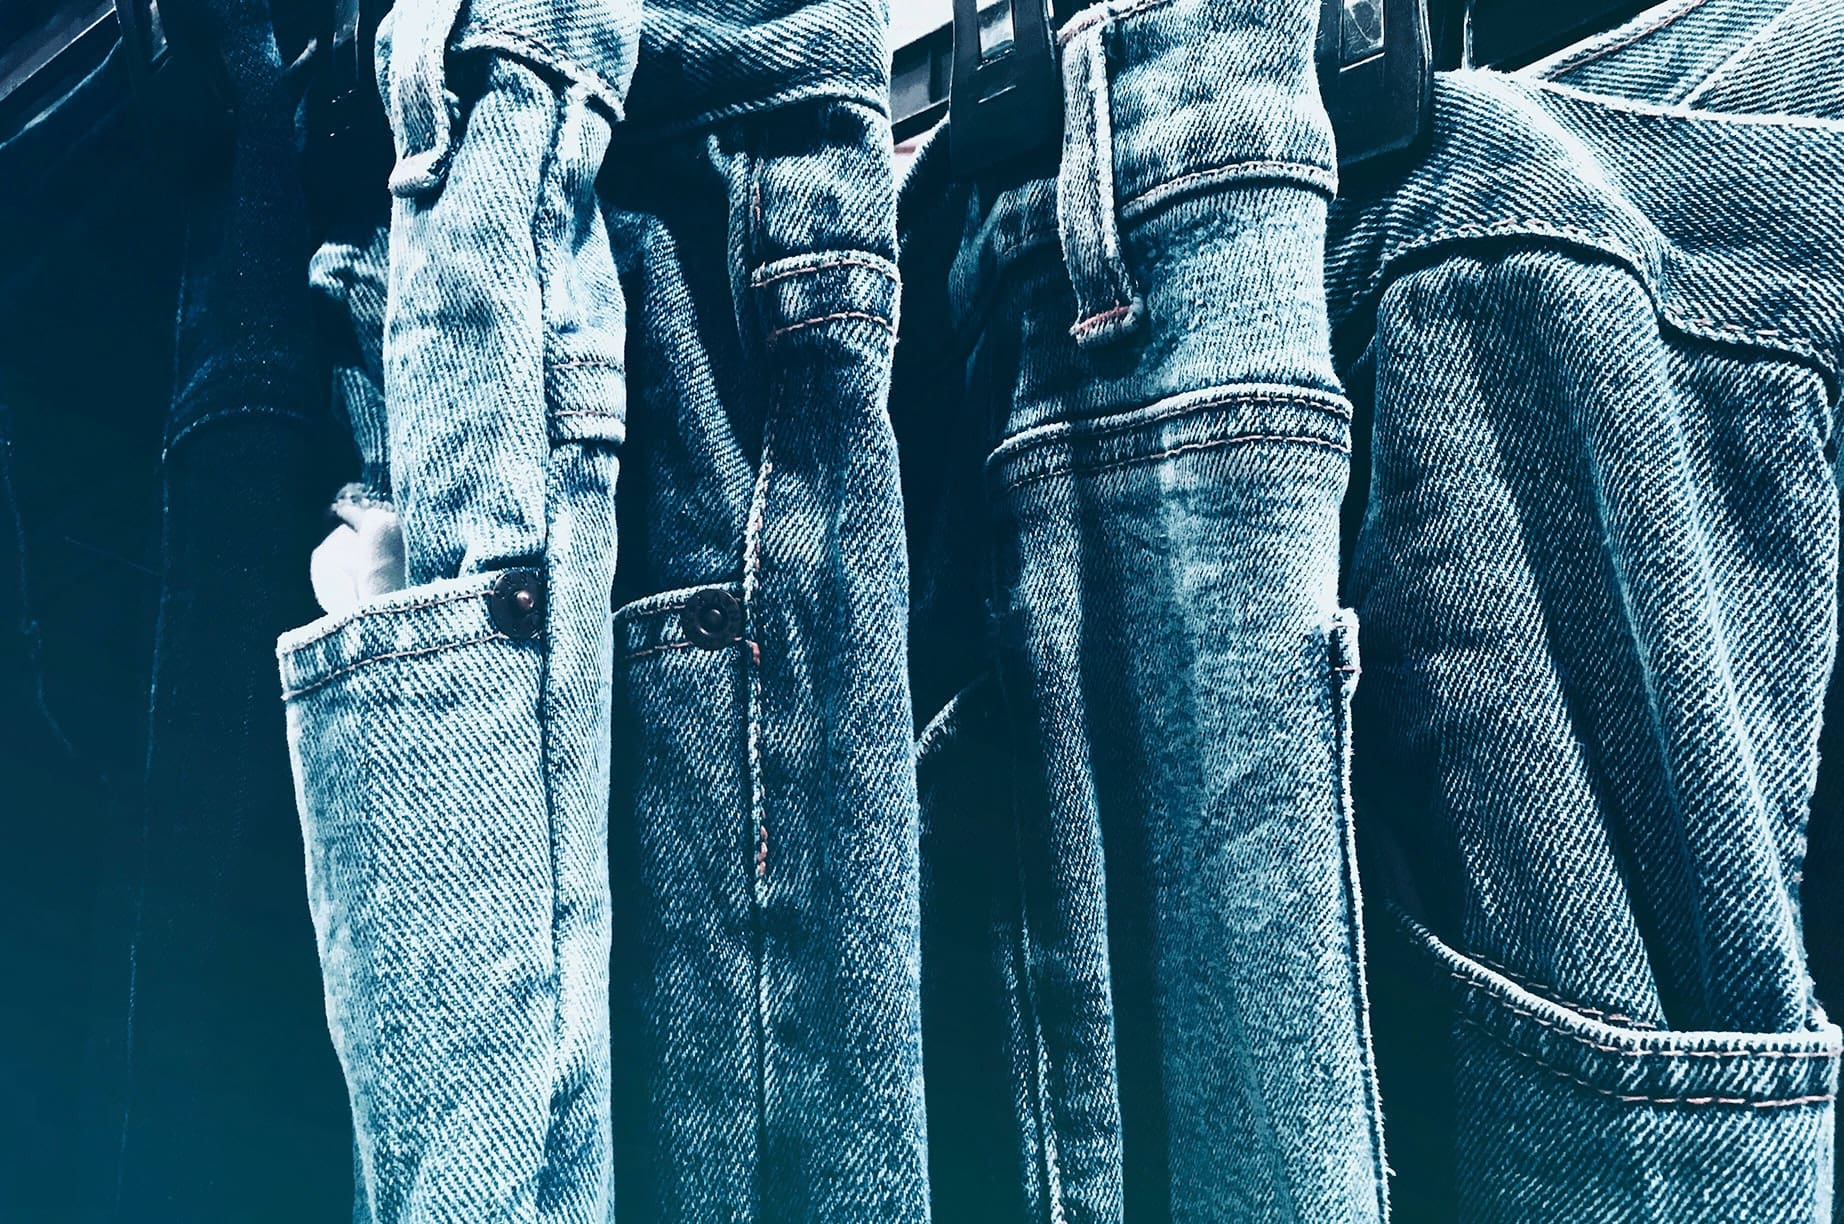 Jeans Manufacturing Company for Sale in Bangalore, India seeking INR 25  crore